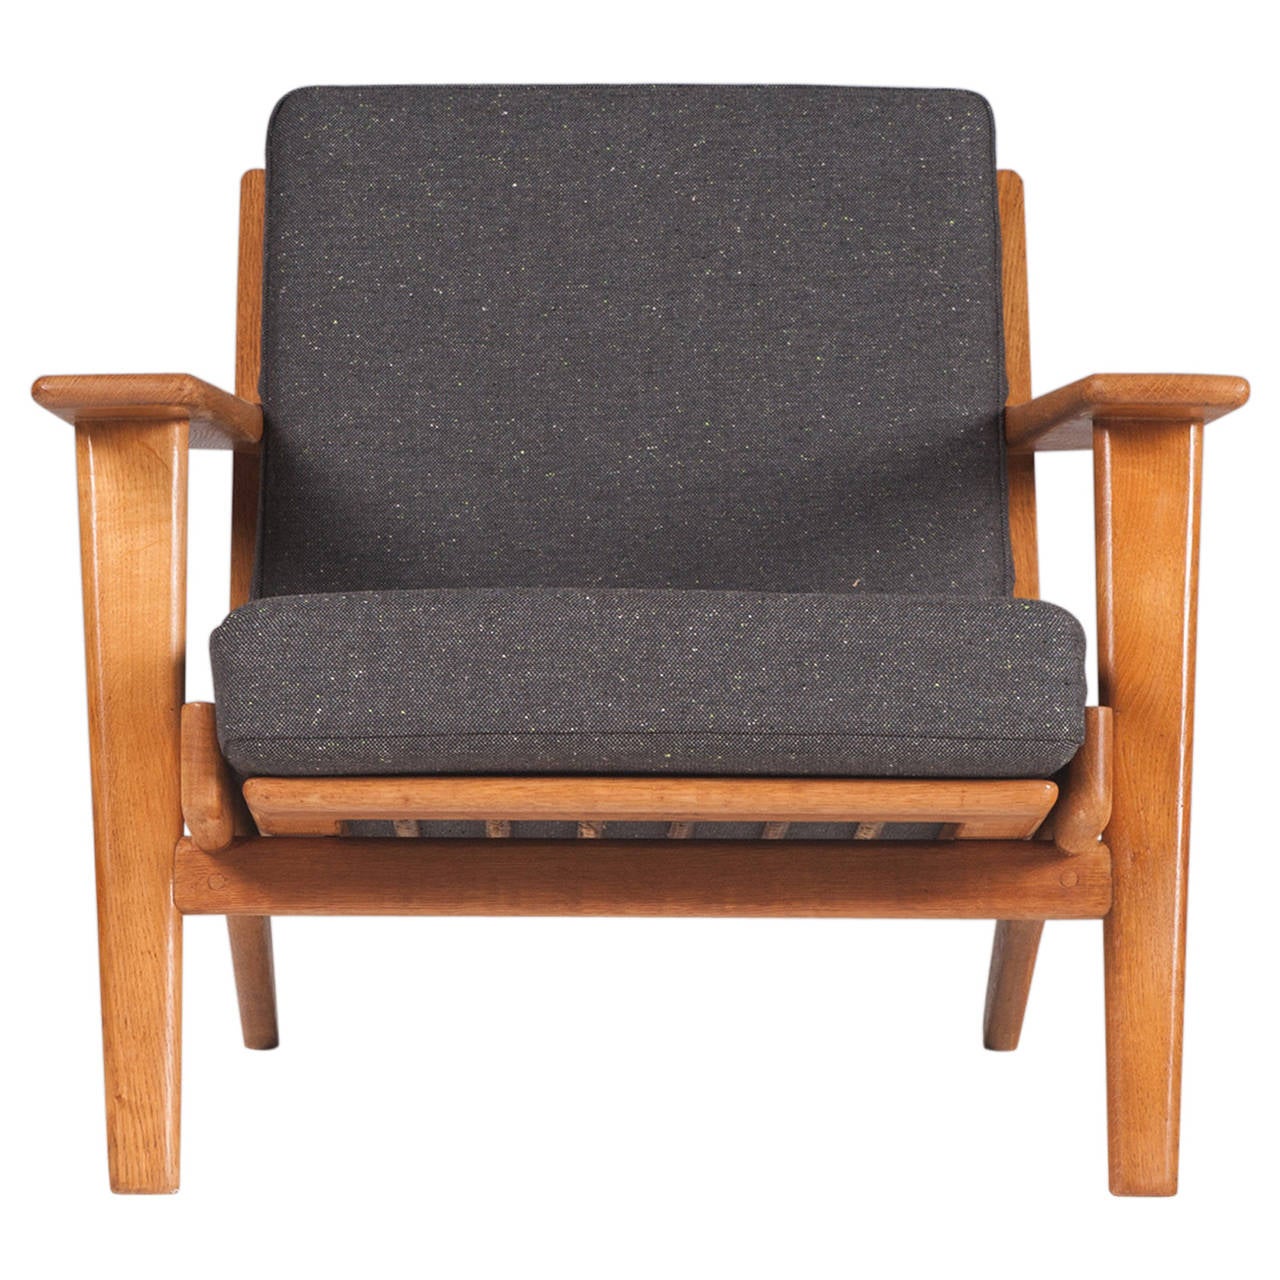 Plank Armchair by renowned Danish designer Hans J. Wegner in beautifully restored condition. Manufactured by Getama in 1953. Newly upholstered in high quality Instyle fabric with a beautiful sold oak frame. Sold as a pair, please enquire for single